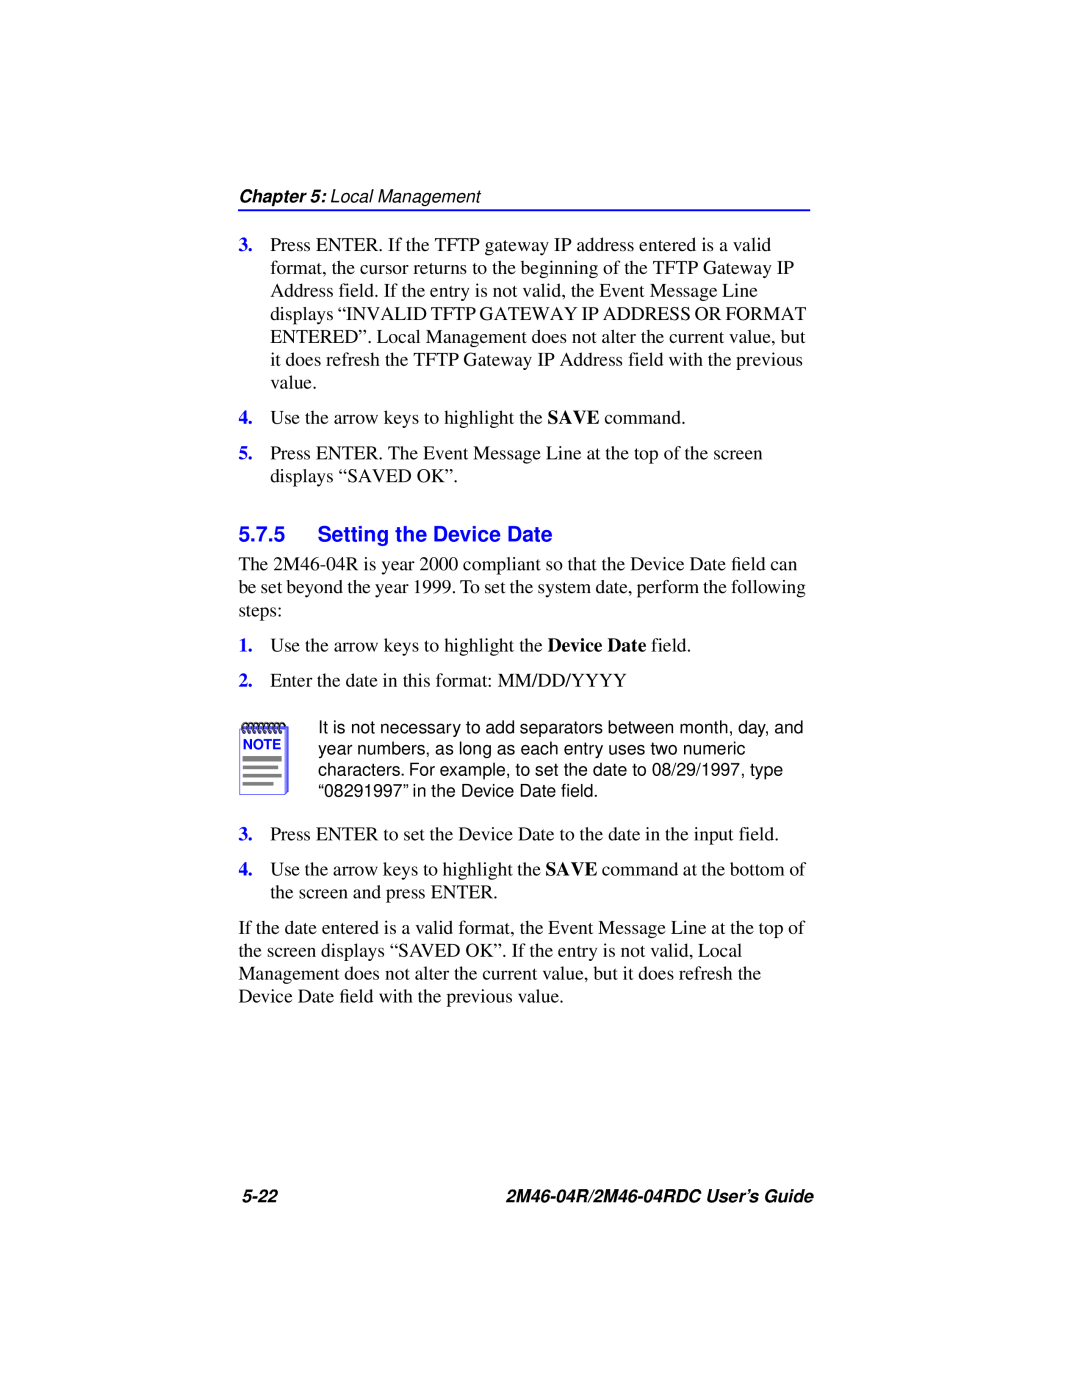 Cabletron Systems pmn manual Setting the Device Date 